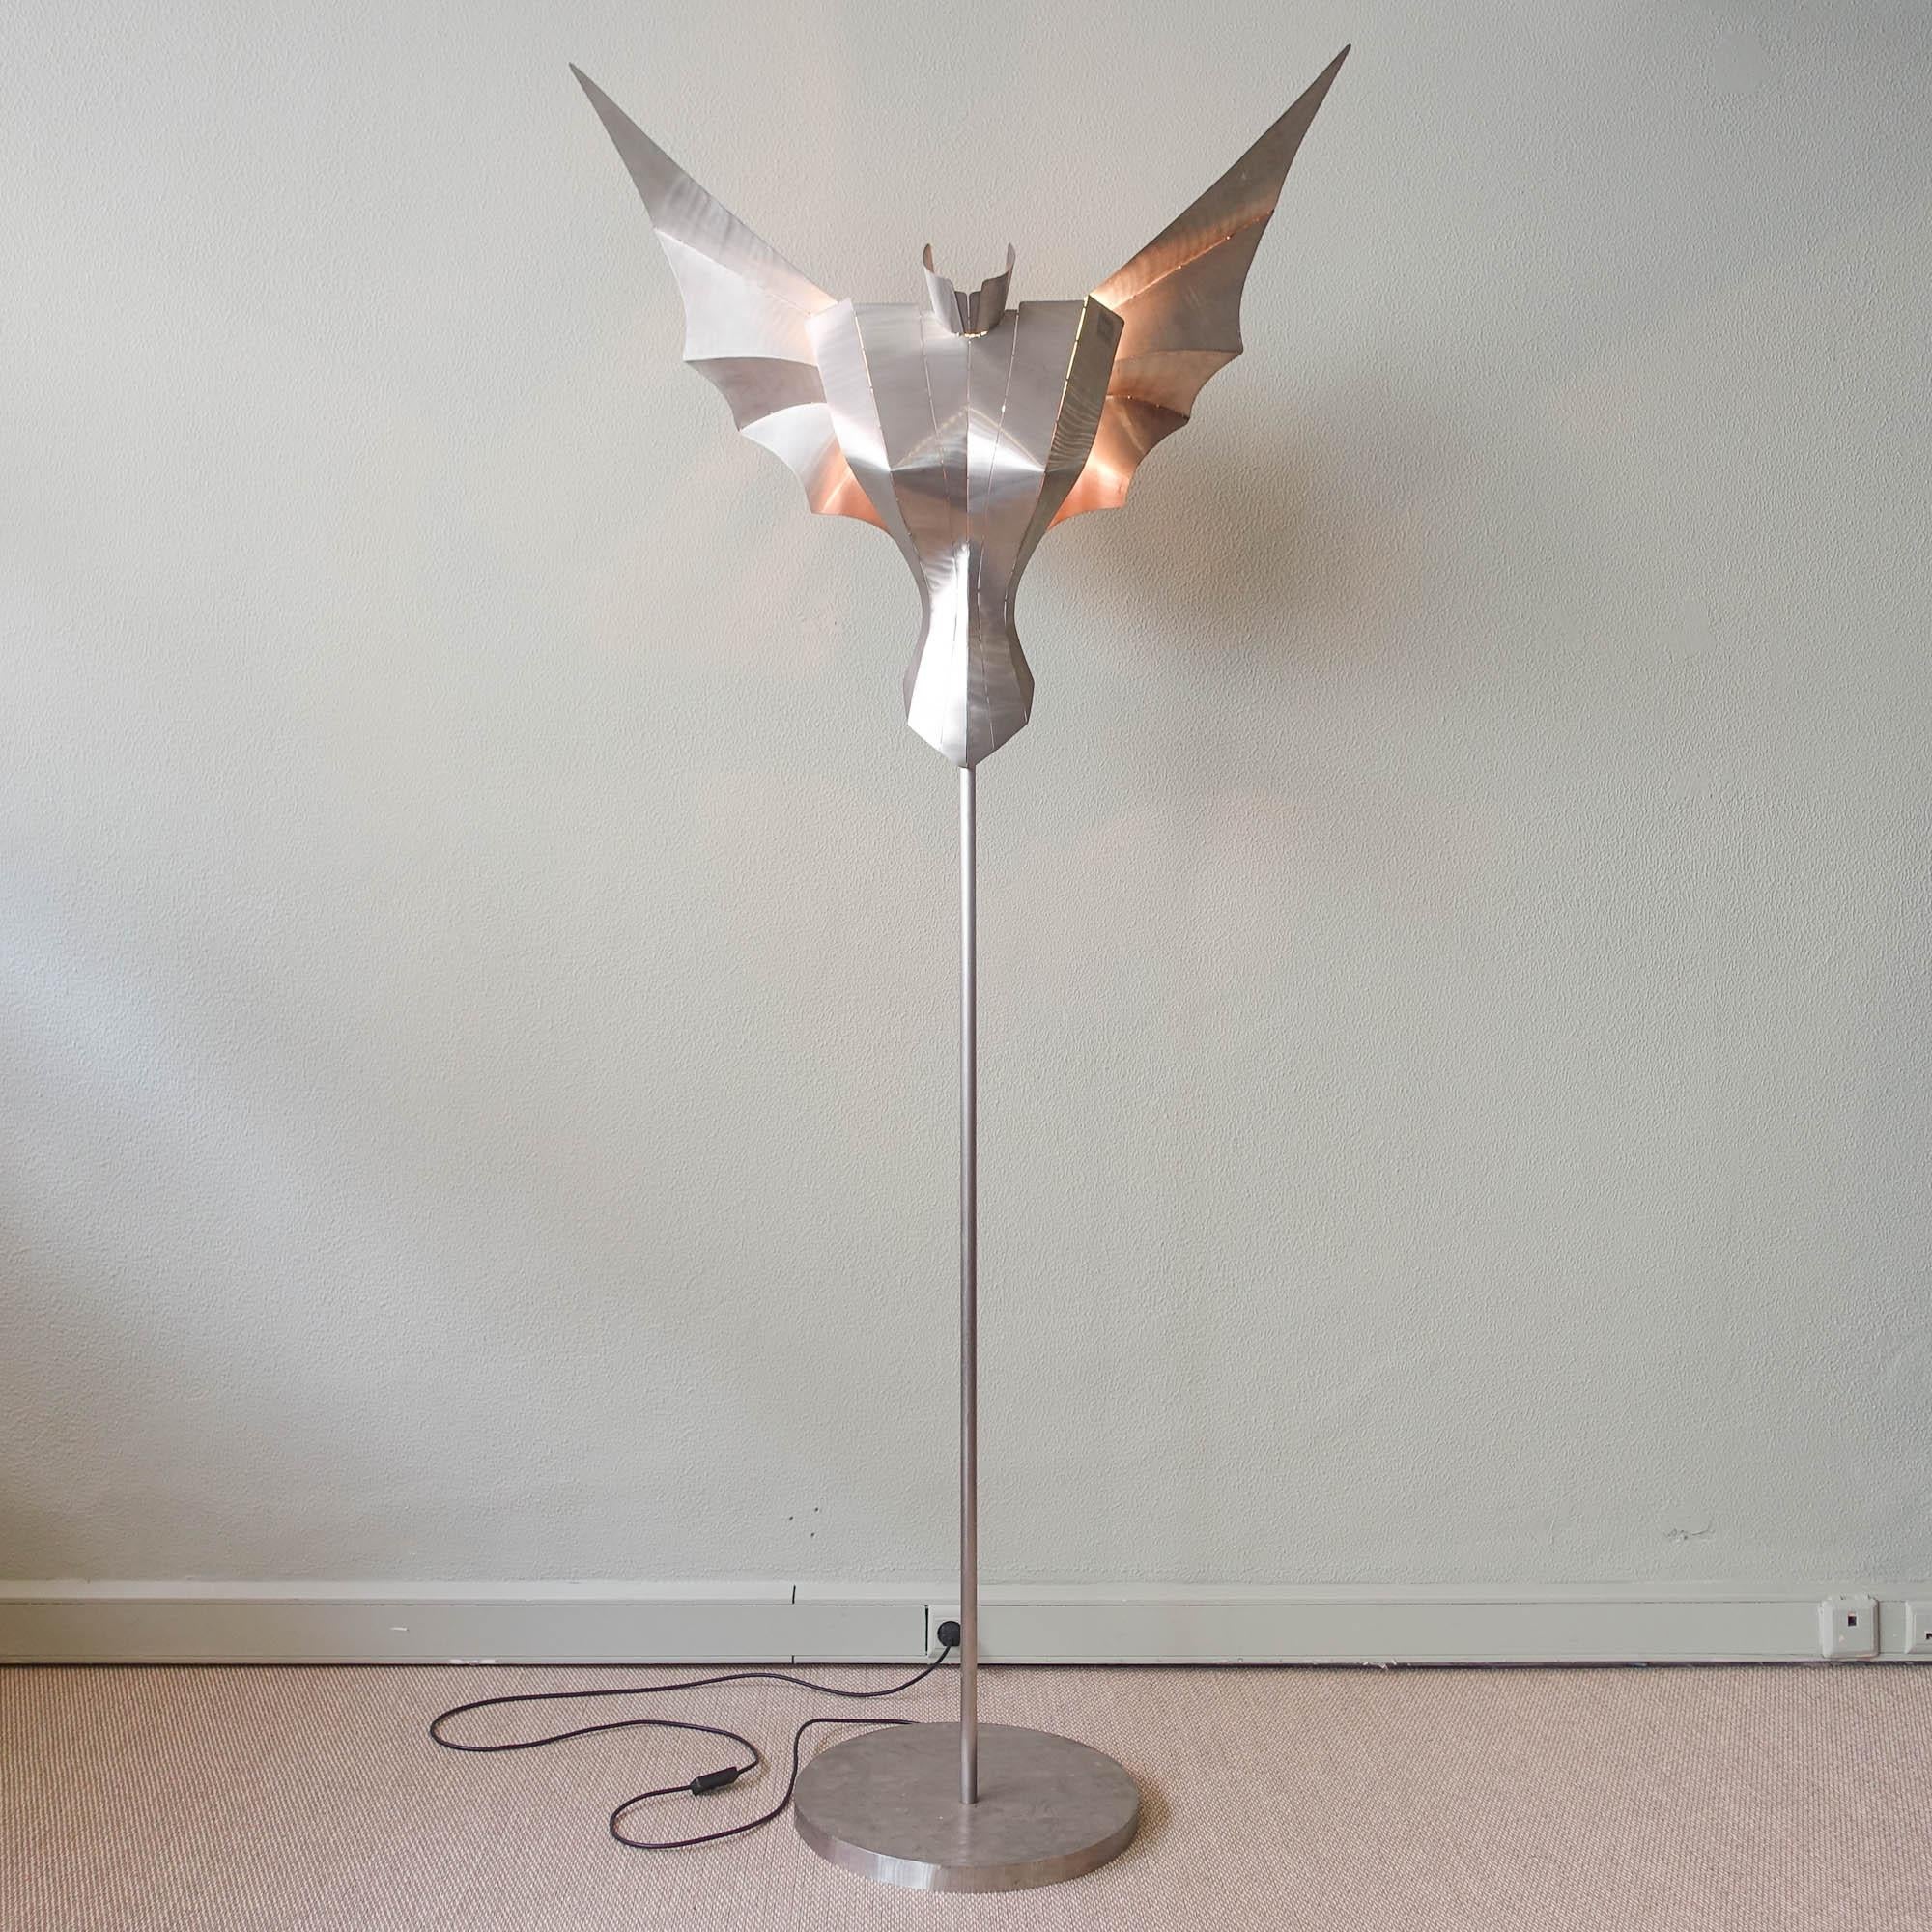 A unique floor lamp / lighting object designed by Reinhard Stubenrauch for Stubenrauch Lichtobjekte in Berlin, Germany, circa 1990's. This piece, model Angel, has an impressive design made of stainless steel in the shape of an angel. It is handmade